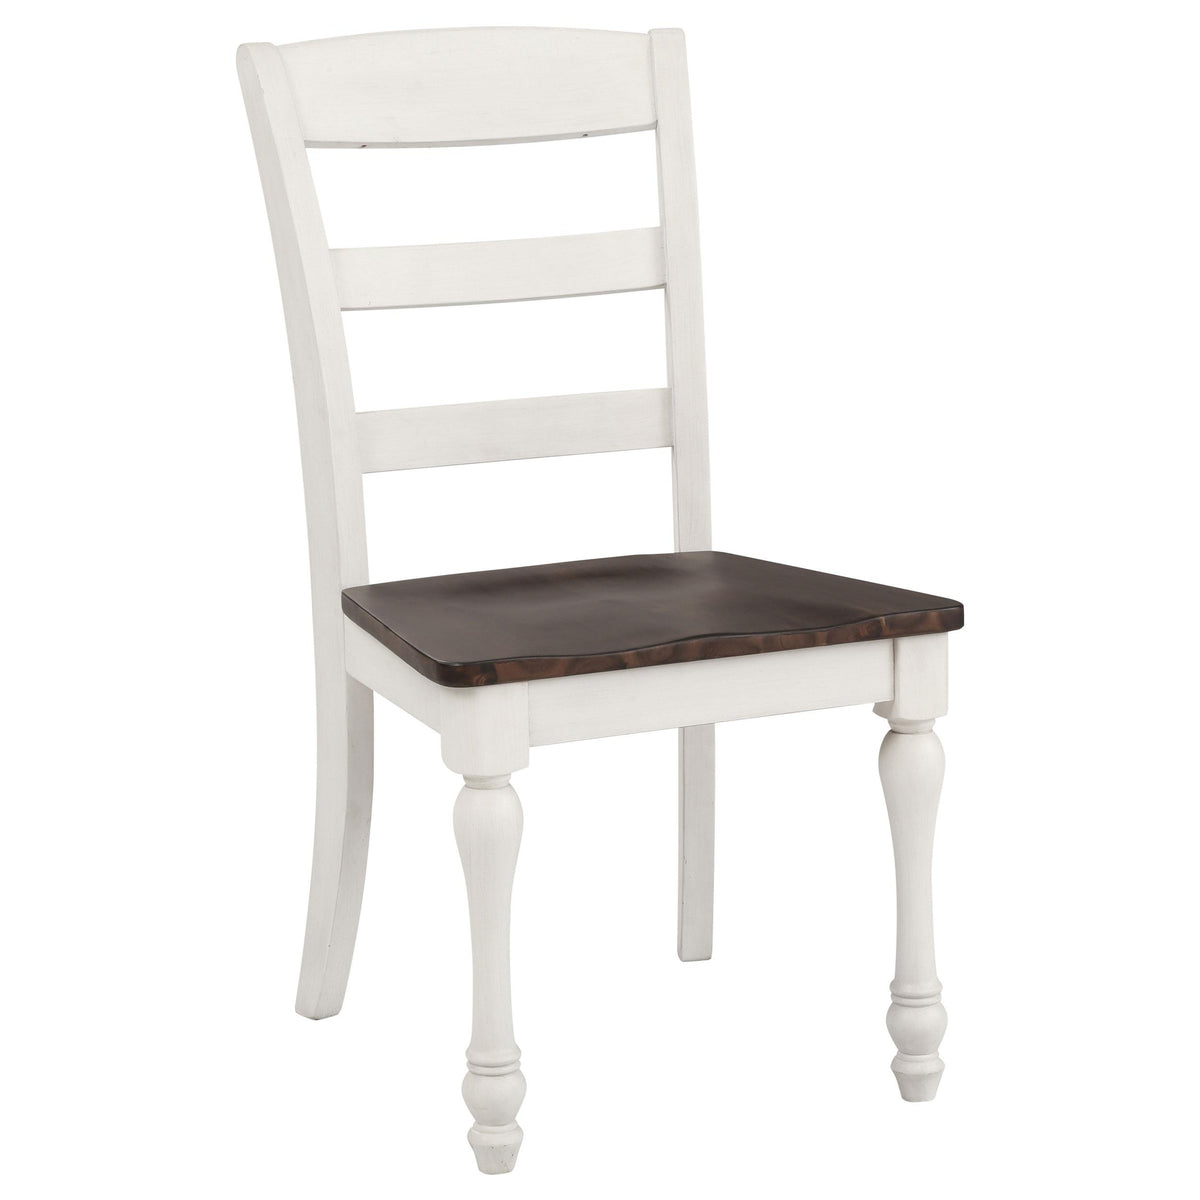 Madelyn Ladder Back Side Chairs Dark Cocoa and Coastal White (Set of 2)  Las Vegas Furniture Stores